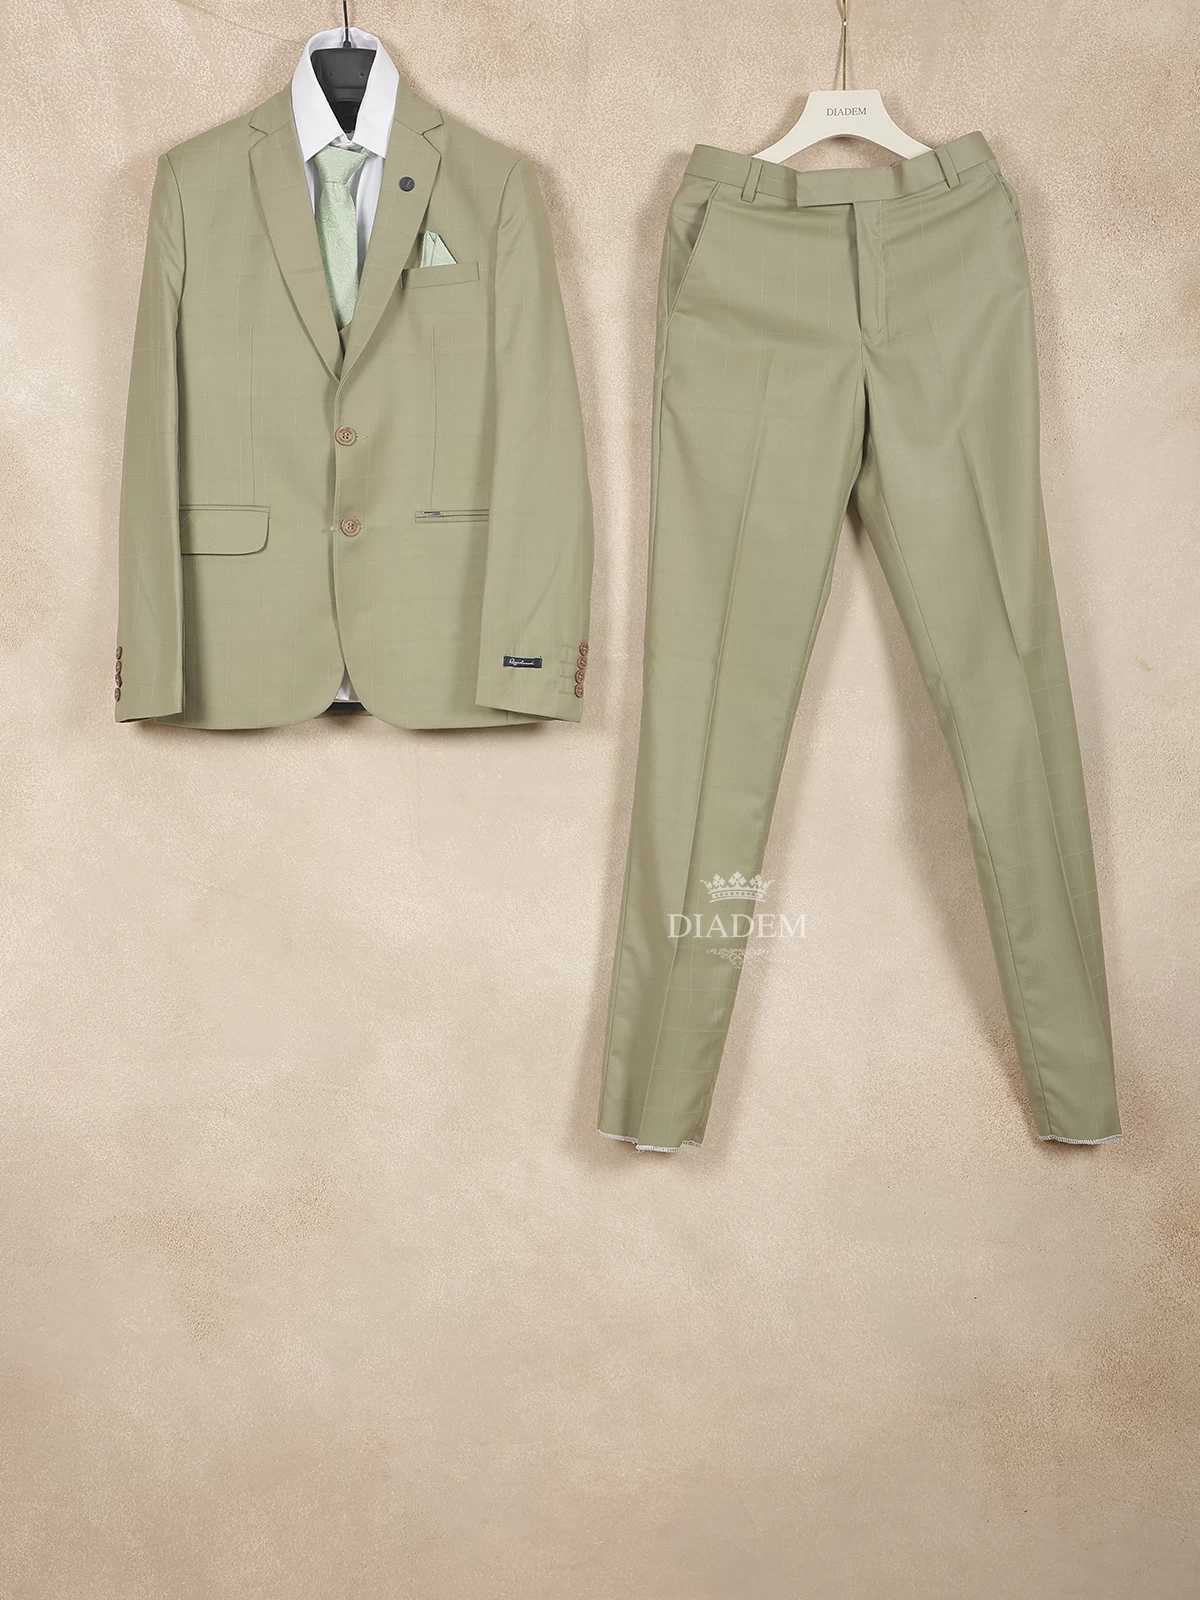 Pista Green Cotton Blend Coat Suit Paired with Matching Tie